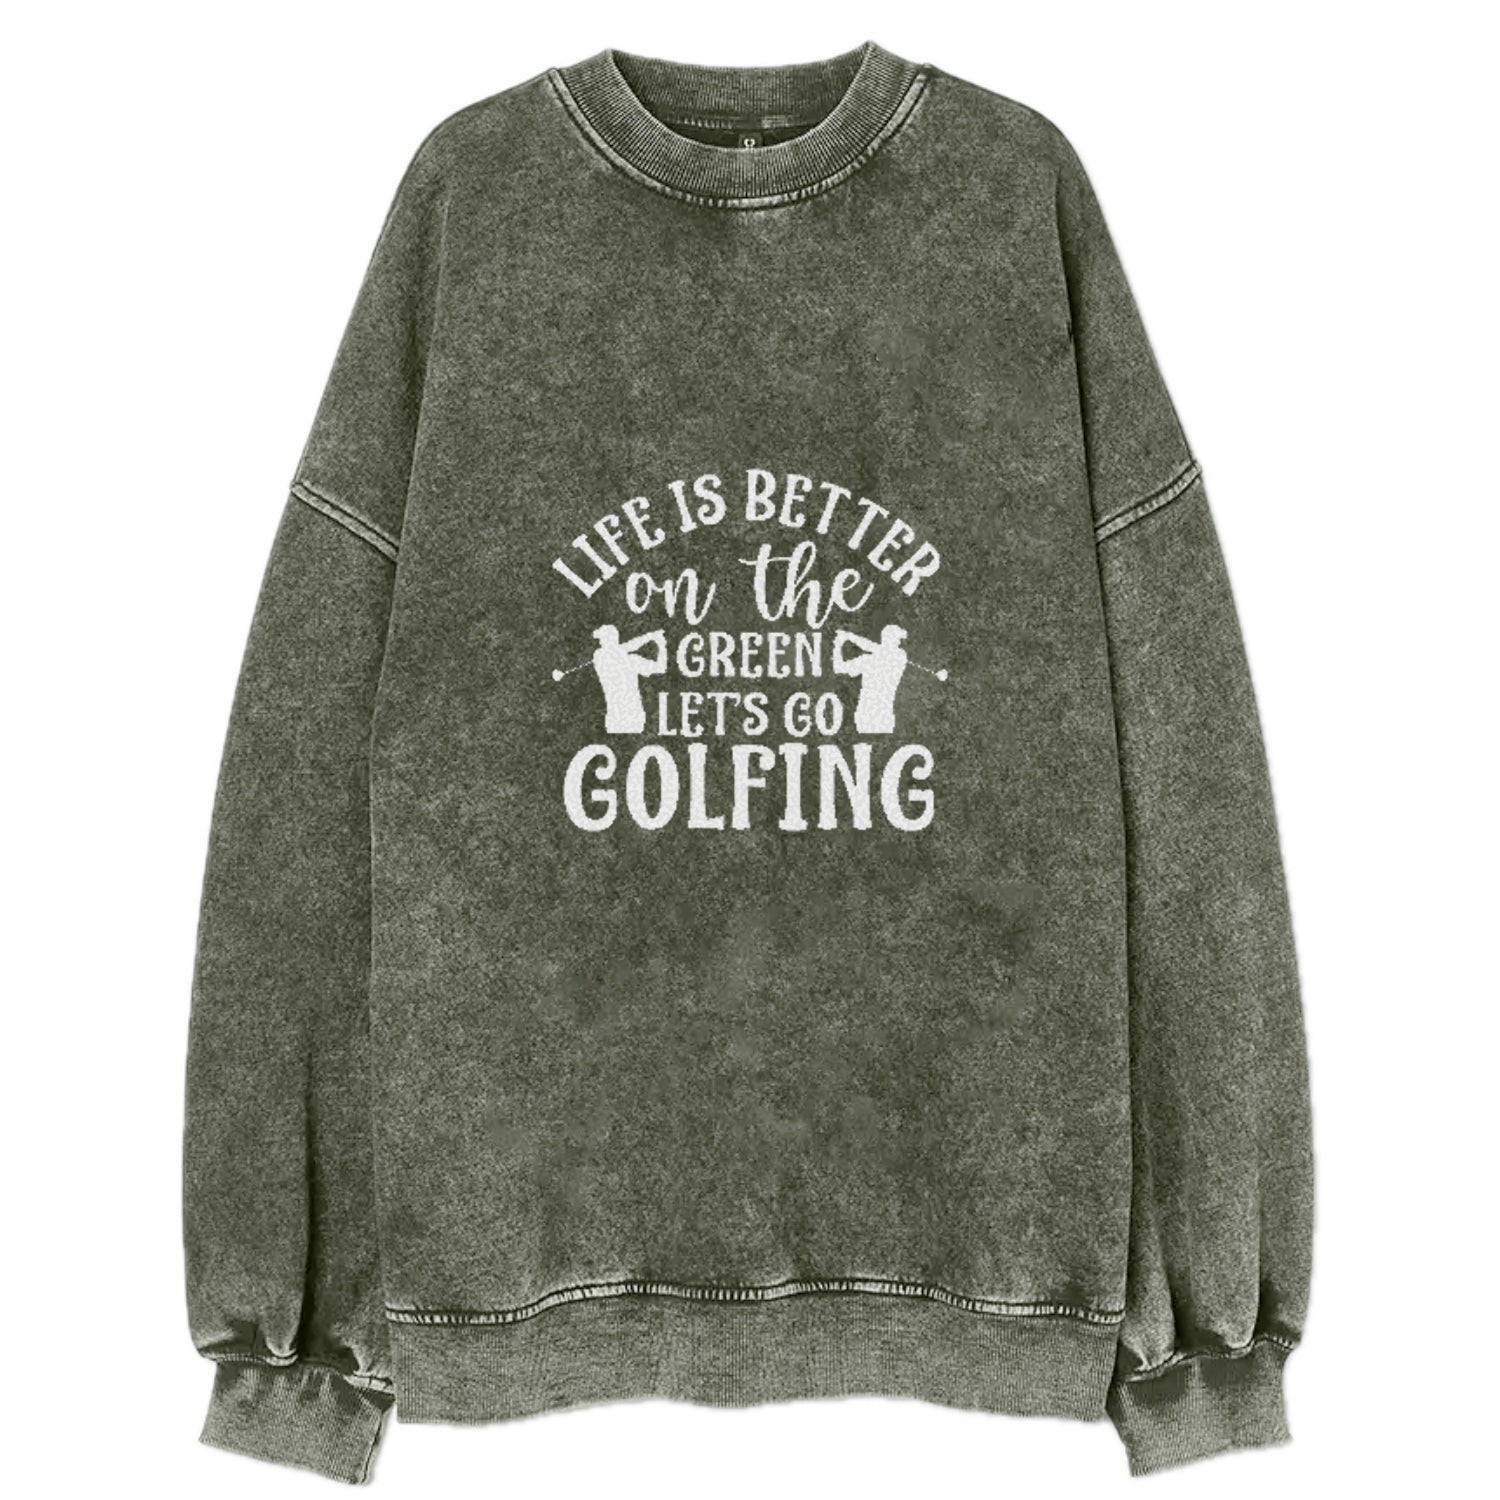 Life Is Better On The Green Let's Go Golfing Vintage Sweatshirt